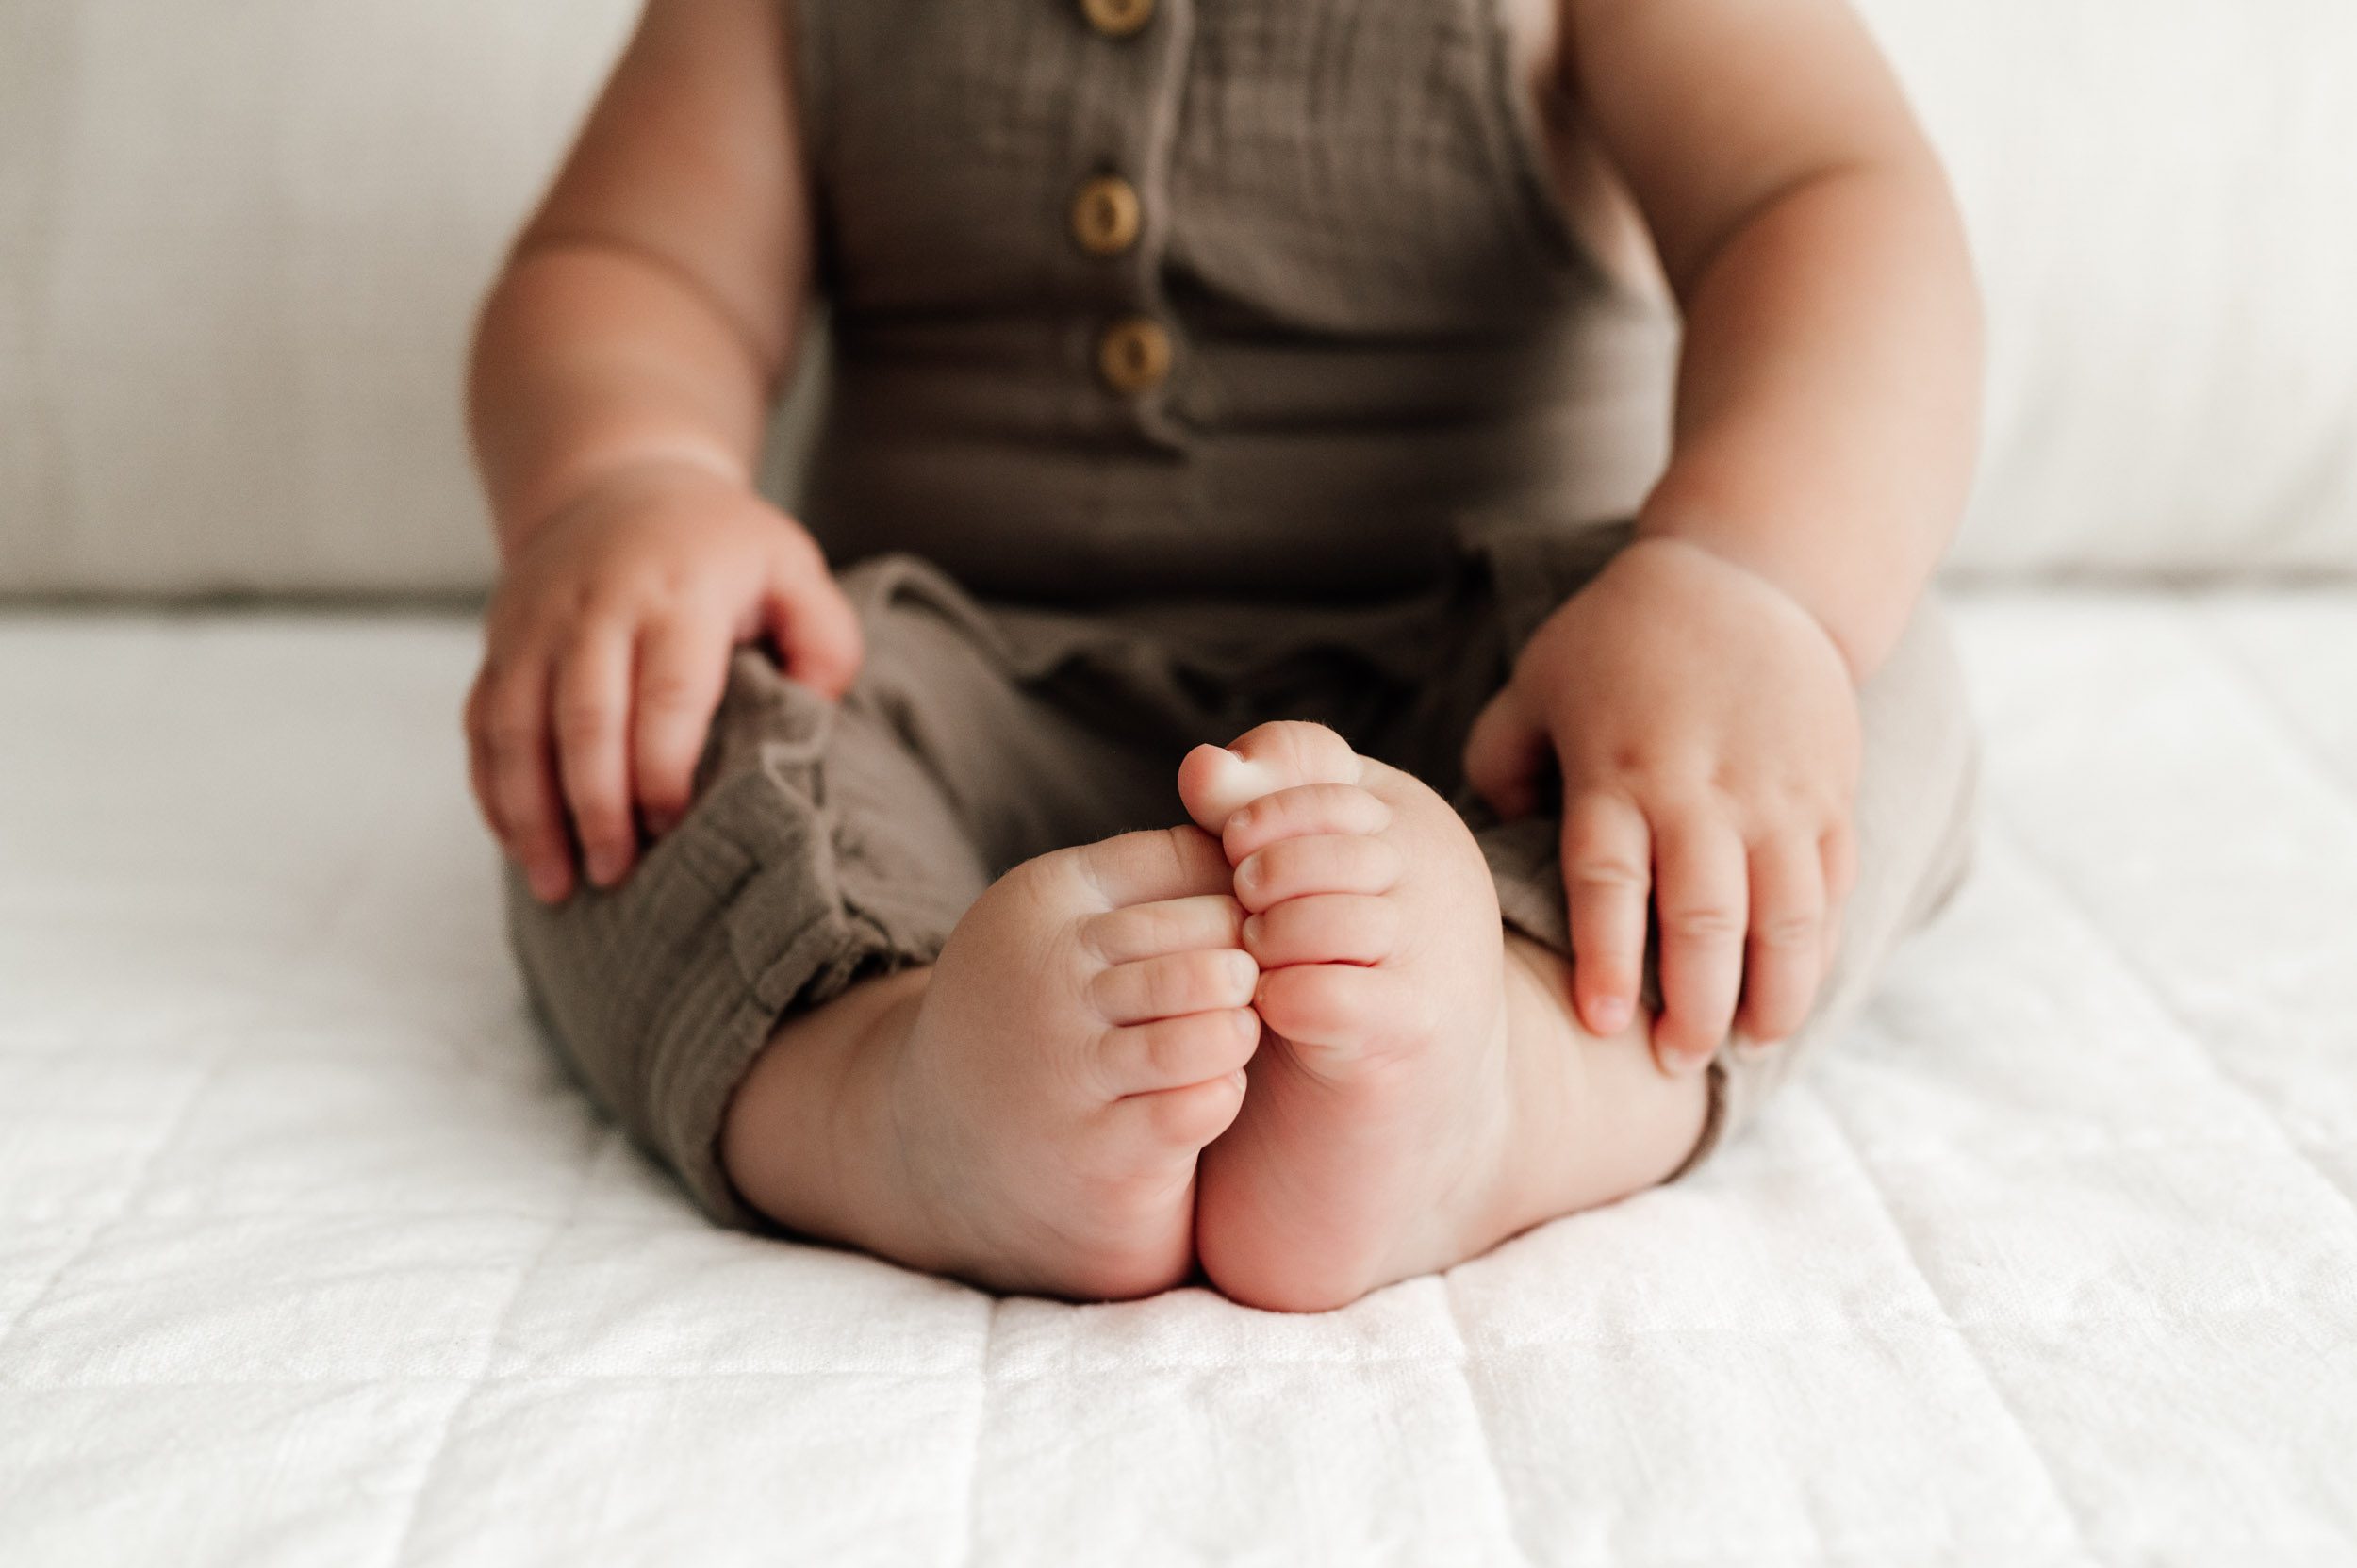 a close up picture of a baby boy's feet and hands as he sits on a bed during a baby milestone photo session